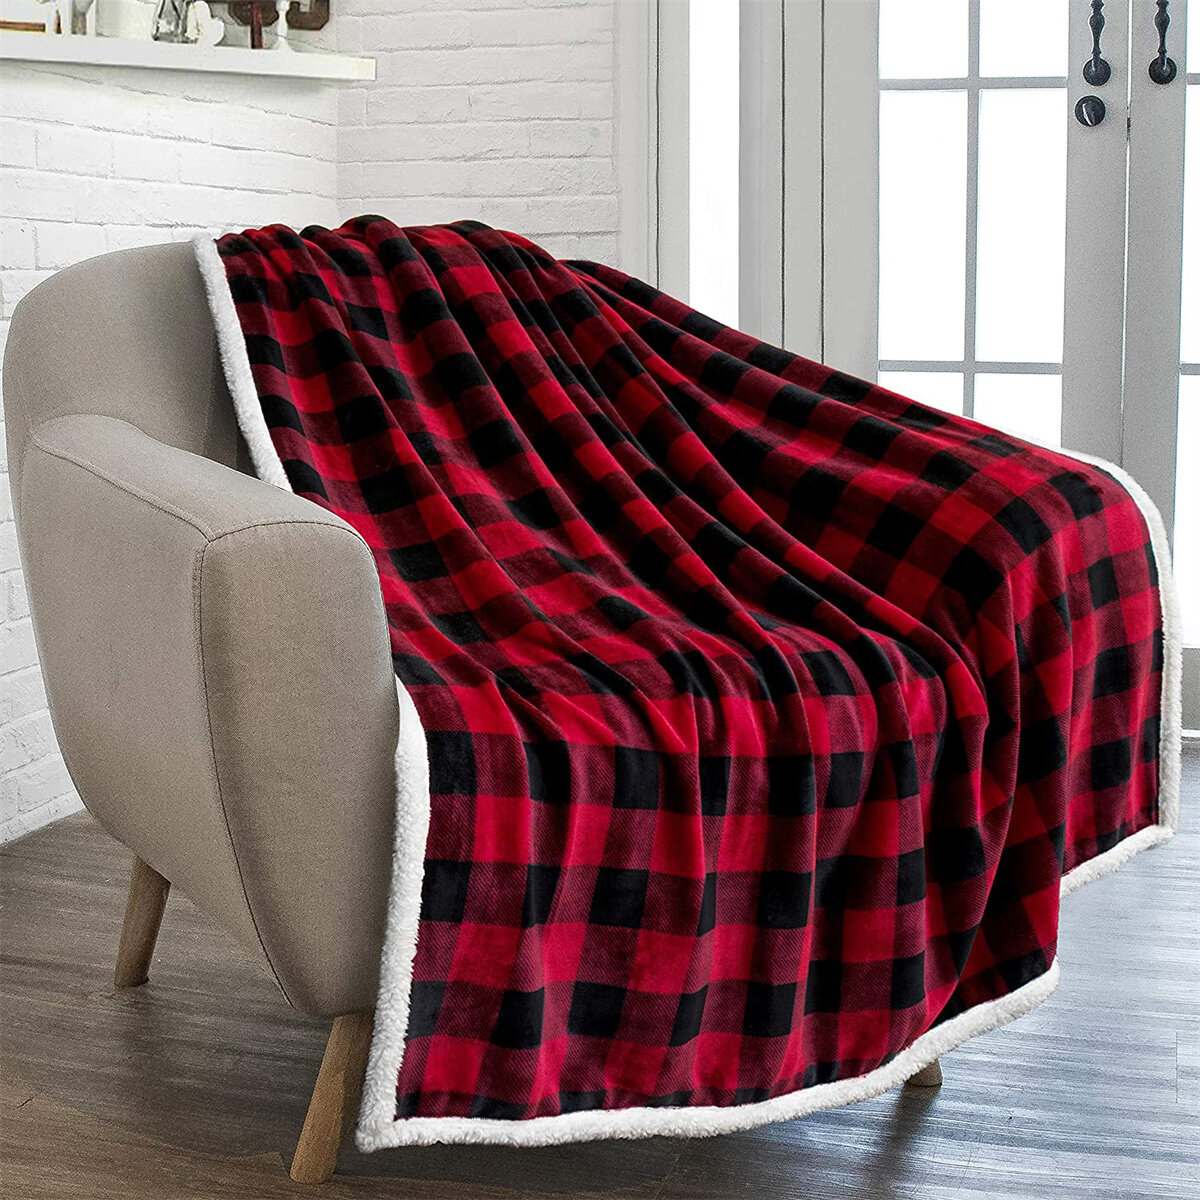 Luxury Flannel Lap Blanket Charleston Southern University Logo Luxury Bed Blanket Microfiber Soft Fuzzy Plush Blanket Super Cozy and Comfy for All Seasons 60X50 